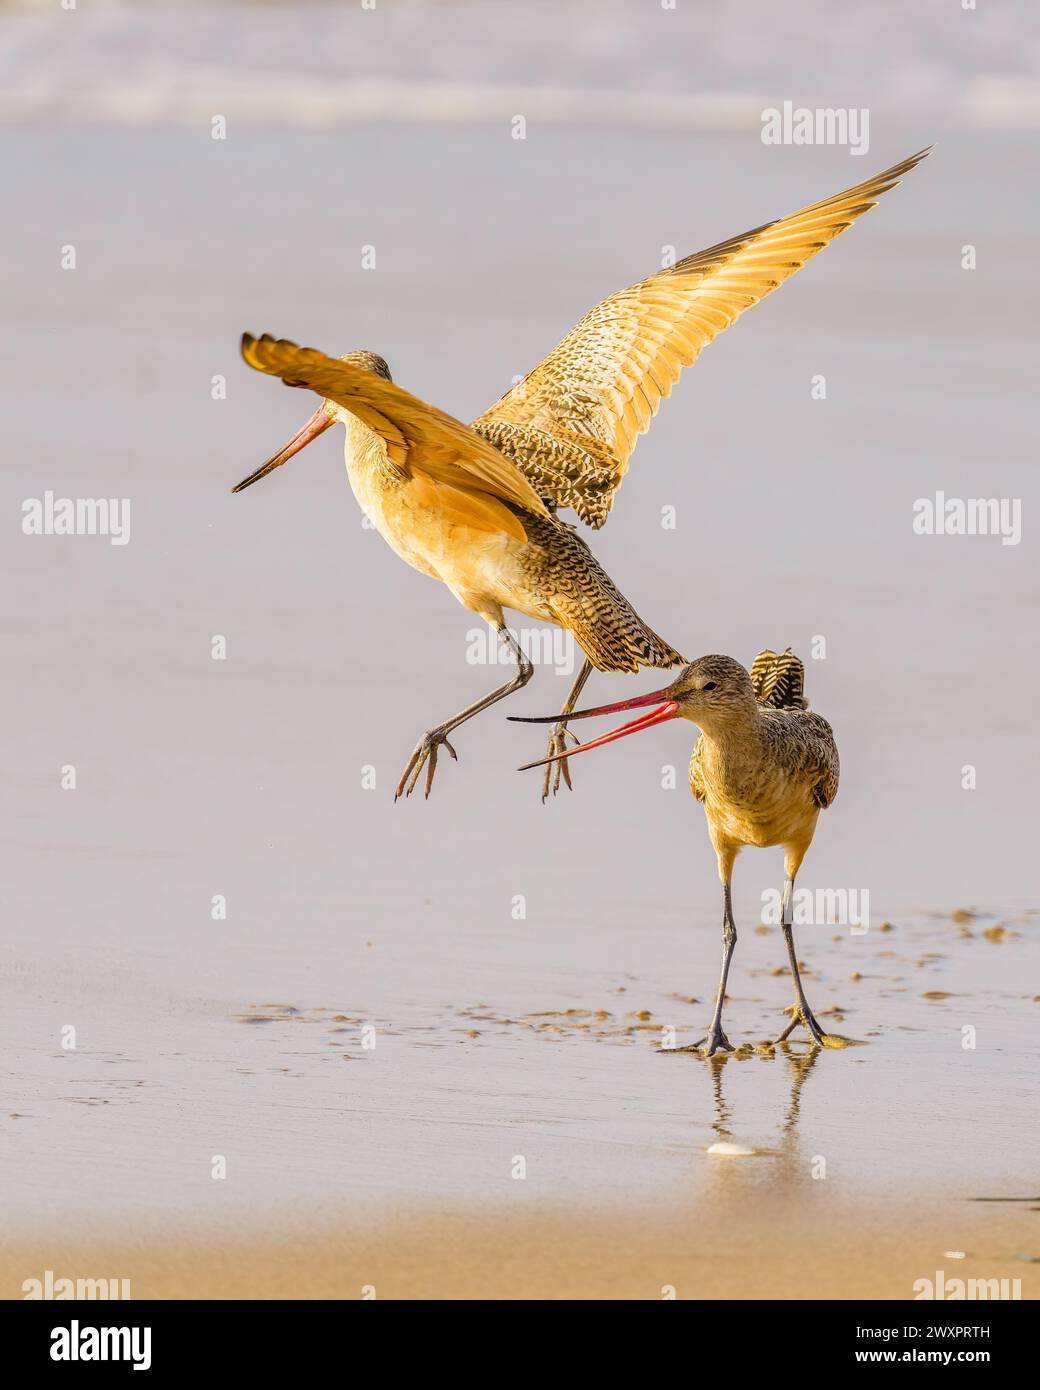 Marbled godwit on the beach at sunset. A close-up portrait of a large shorebird, California Central Coast. Stock Photo